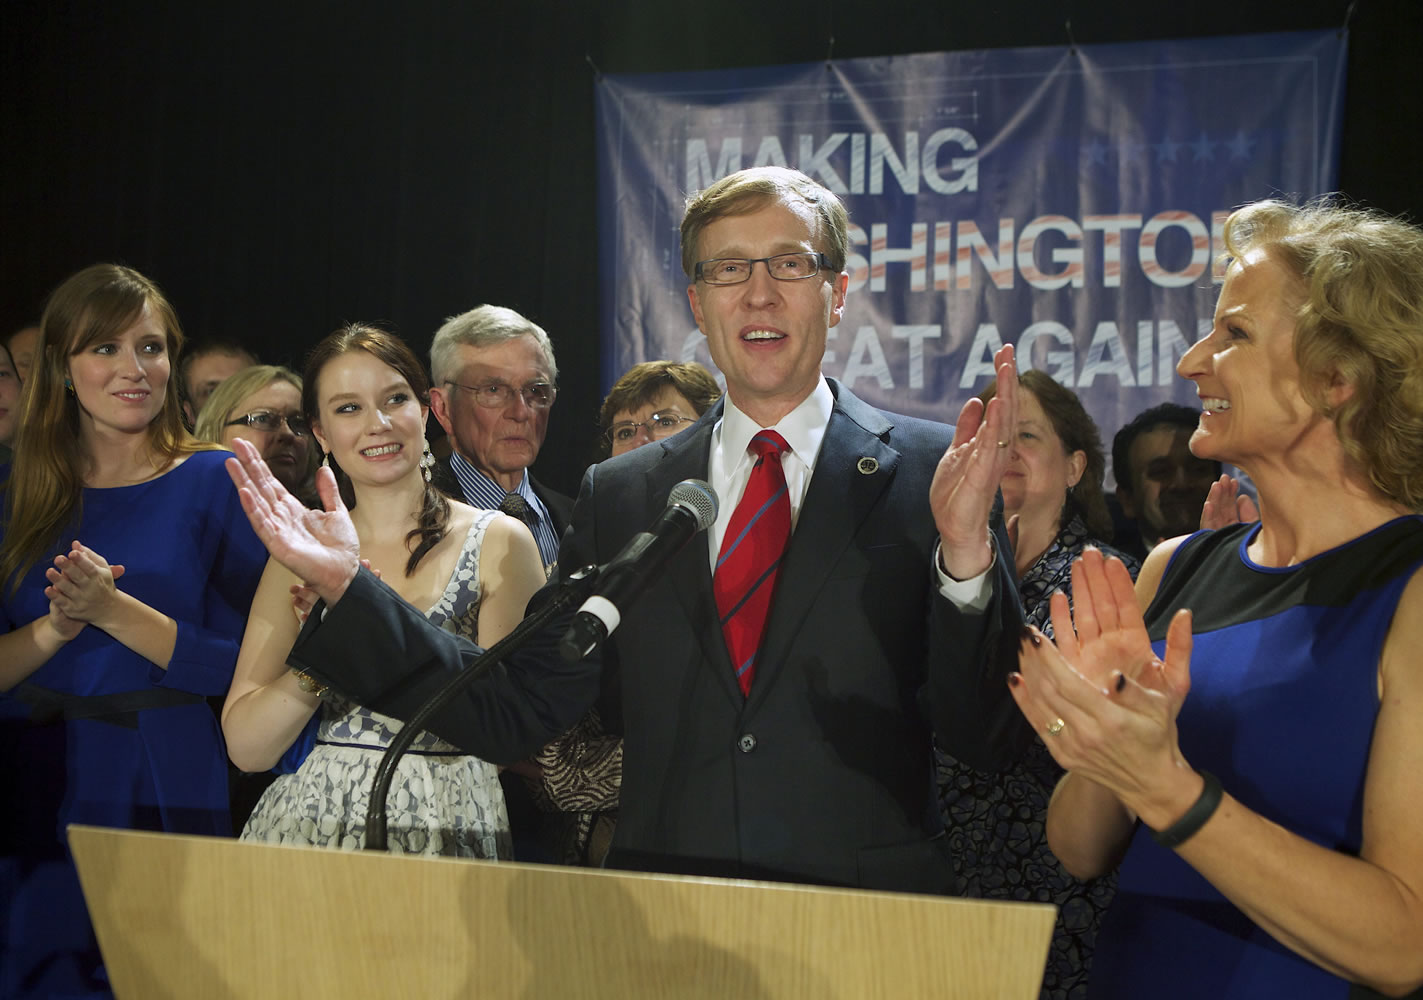 Rob McKenna, Republican candidate for Washington Governor, talks to supporters, while daughters Madelin, Katie and wife Marilyn applaud Tuesday in Bellevue